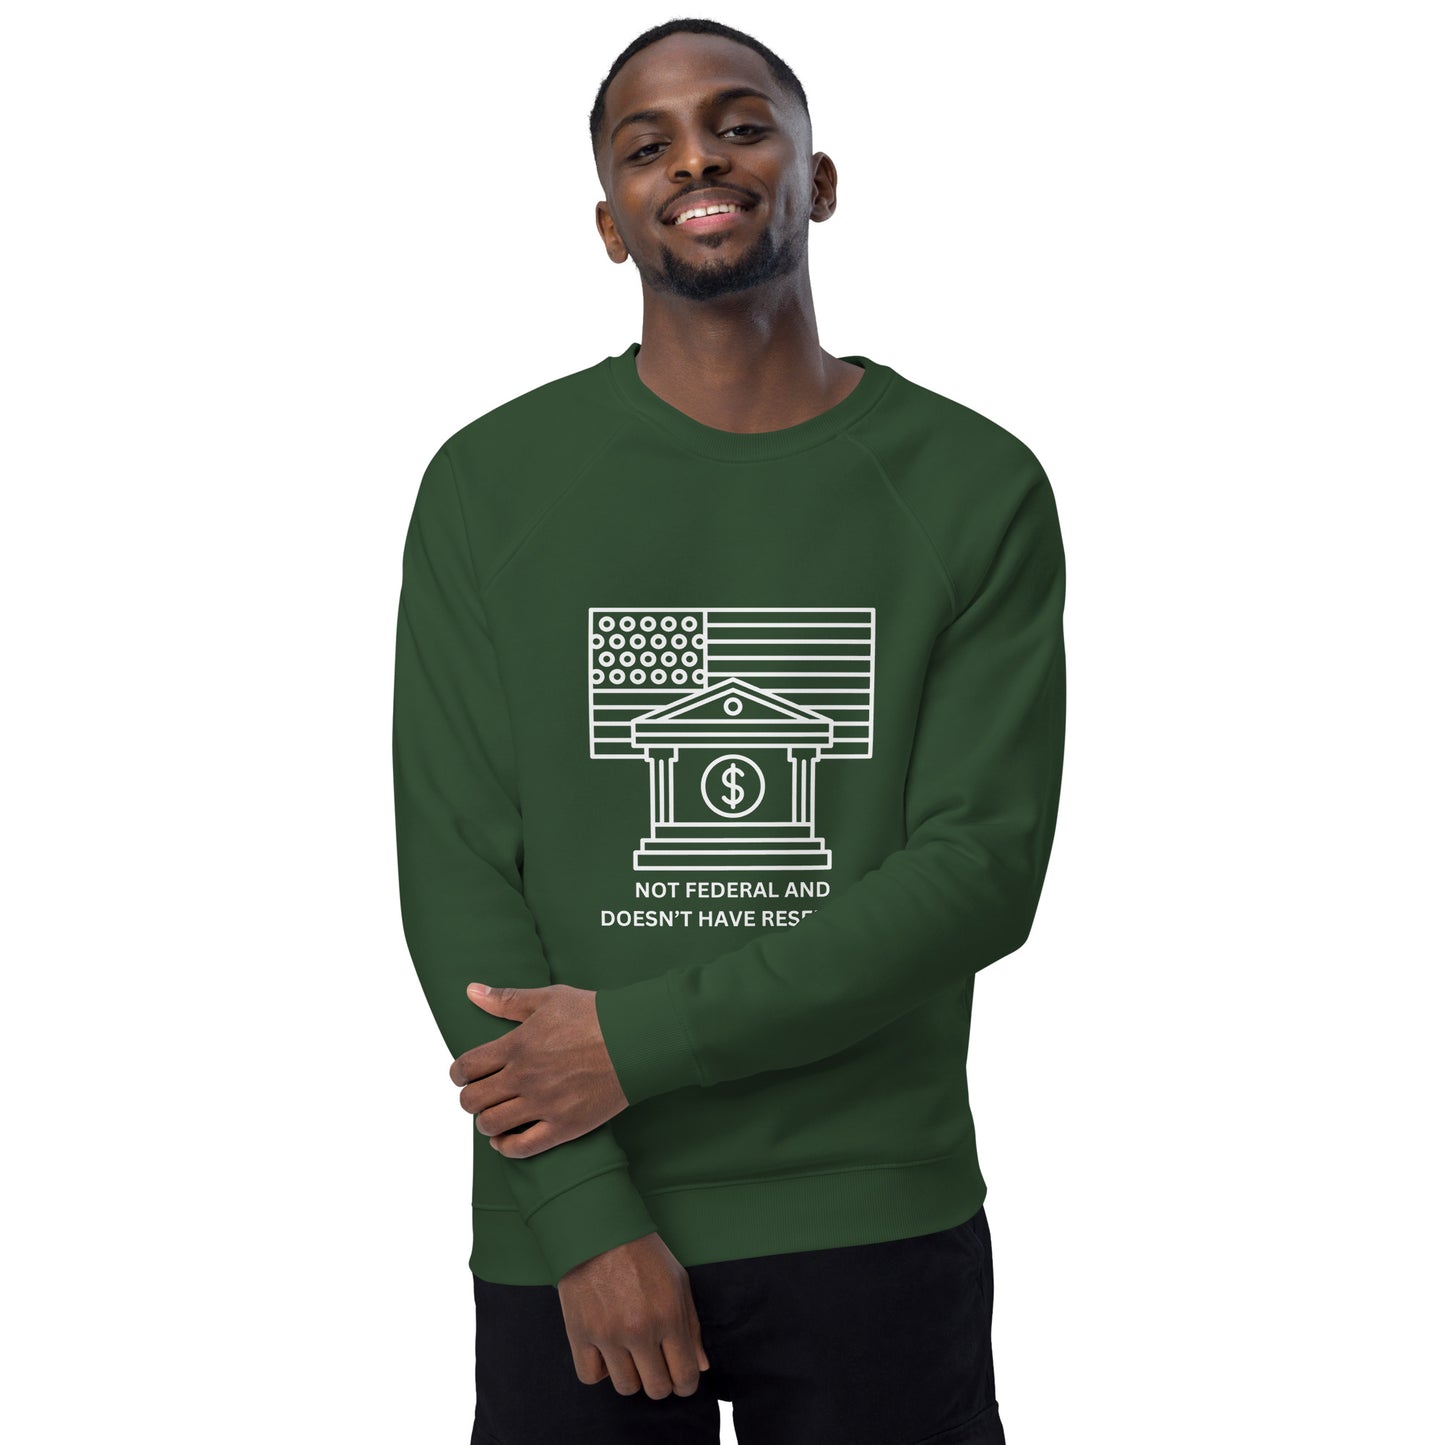 Not federal and doesn't have reserves Unisex organic raglan sweatshirt